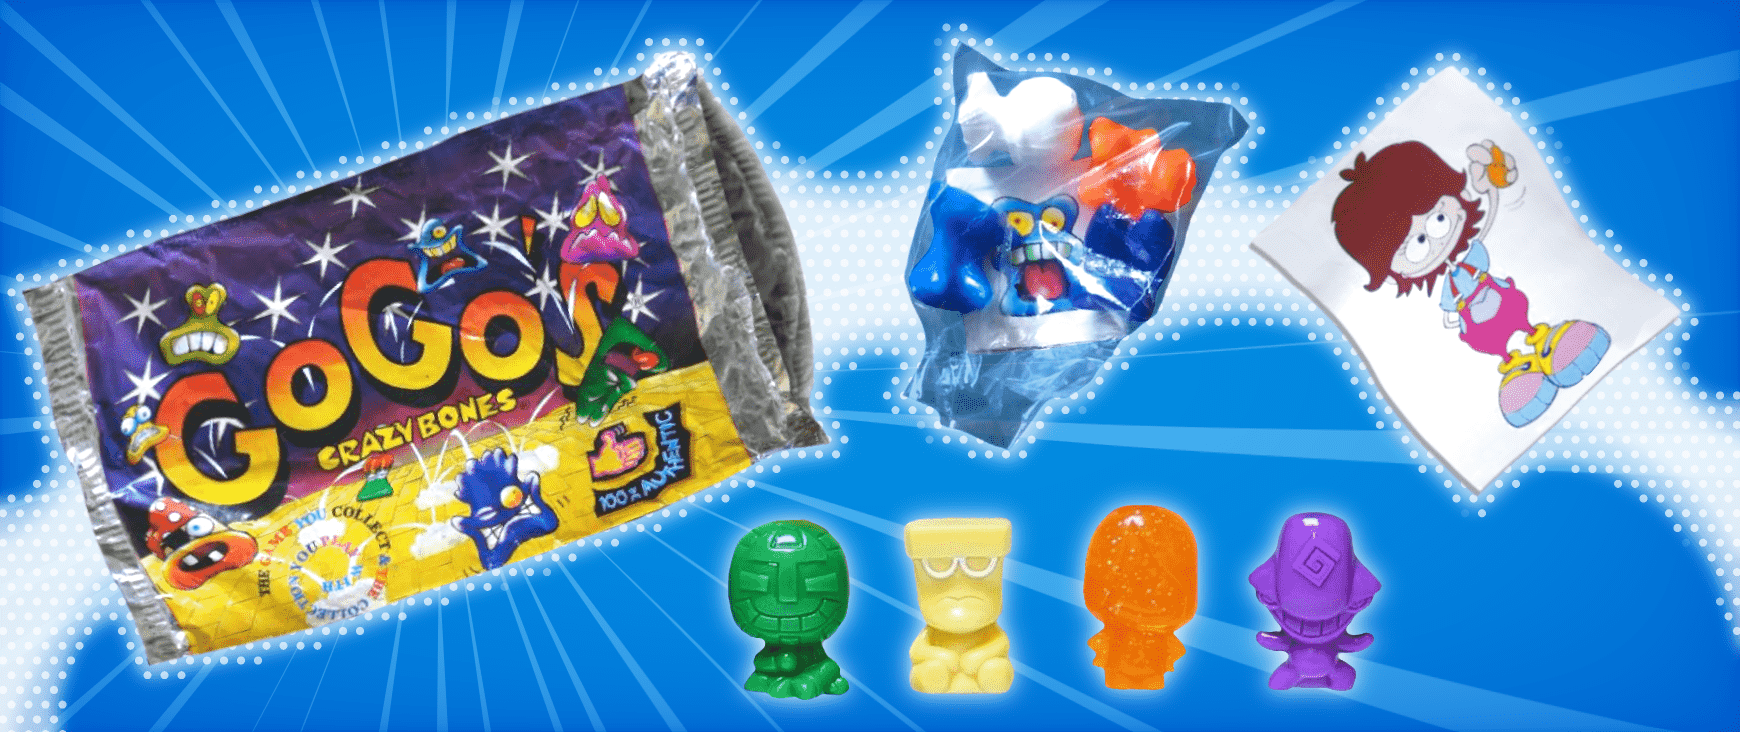 GoGo's Crazy Bones packet, figures and stickers